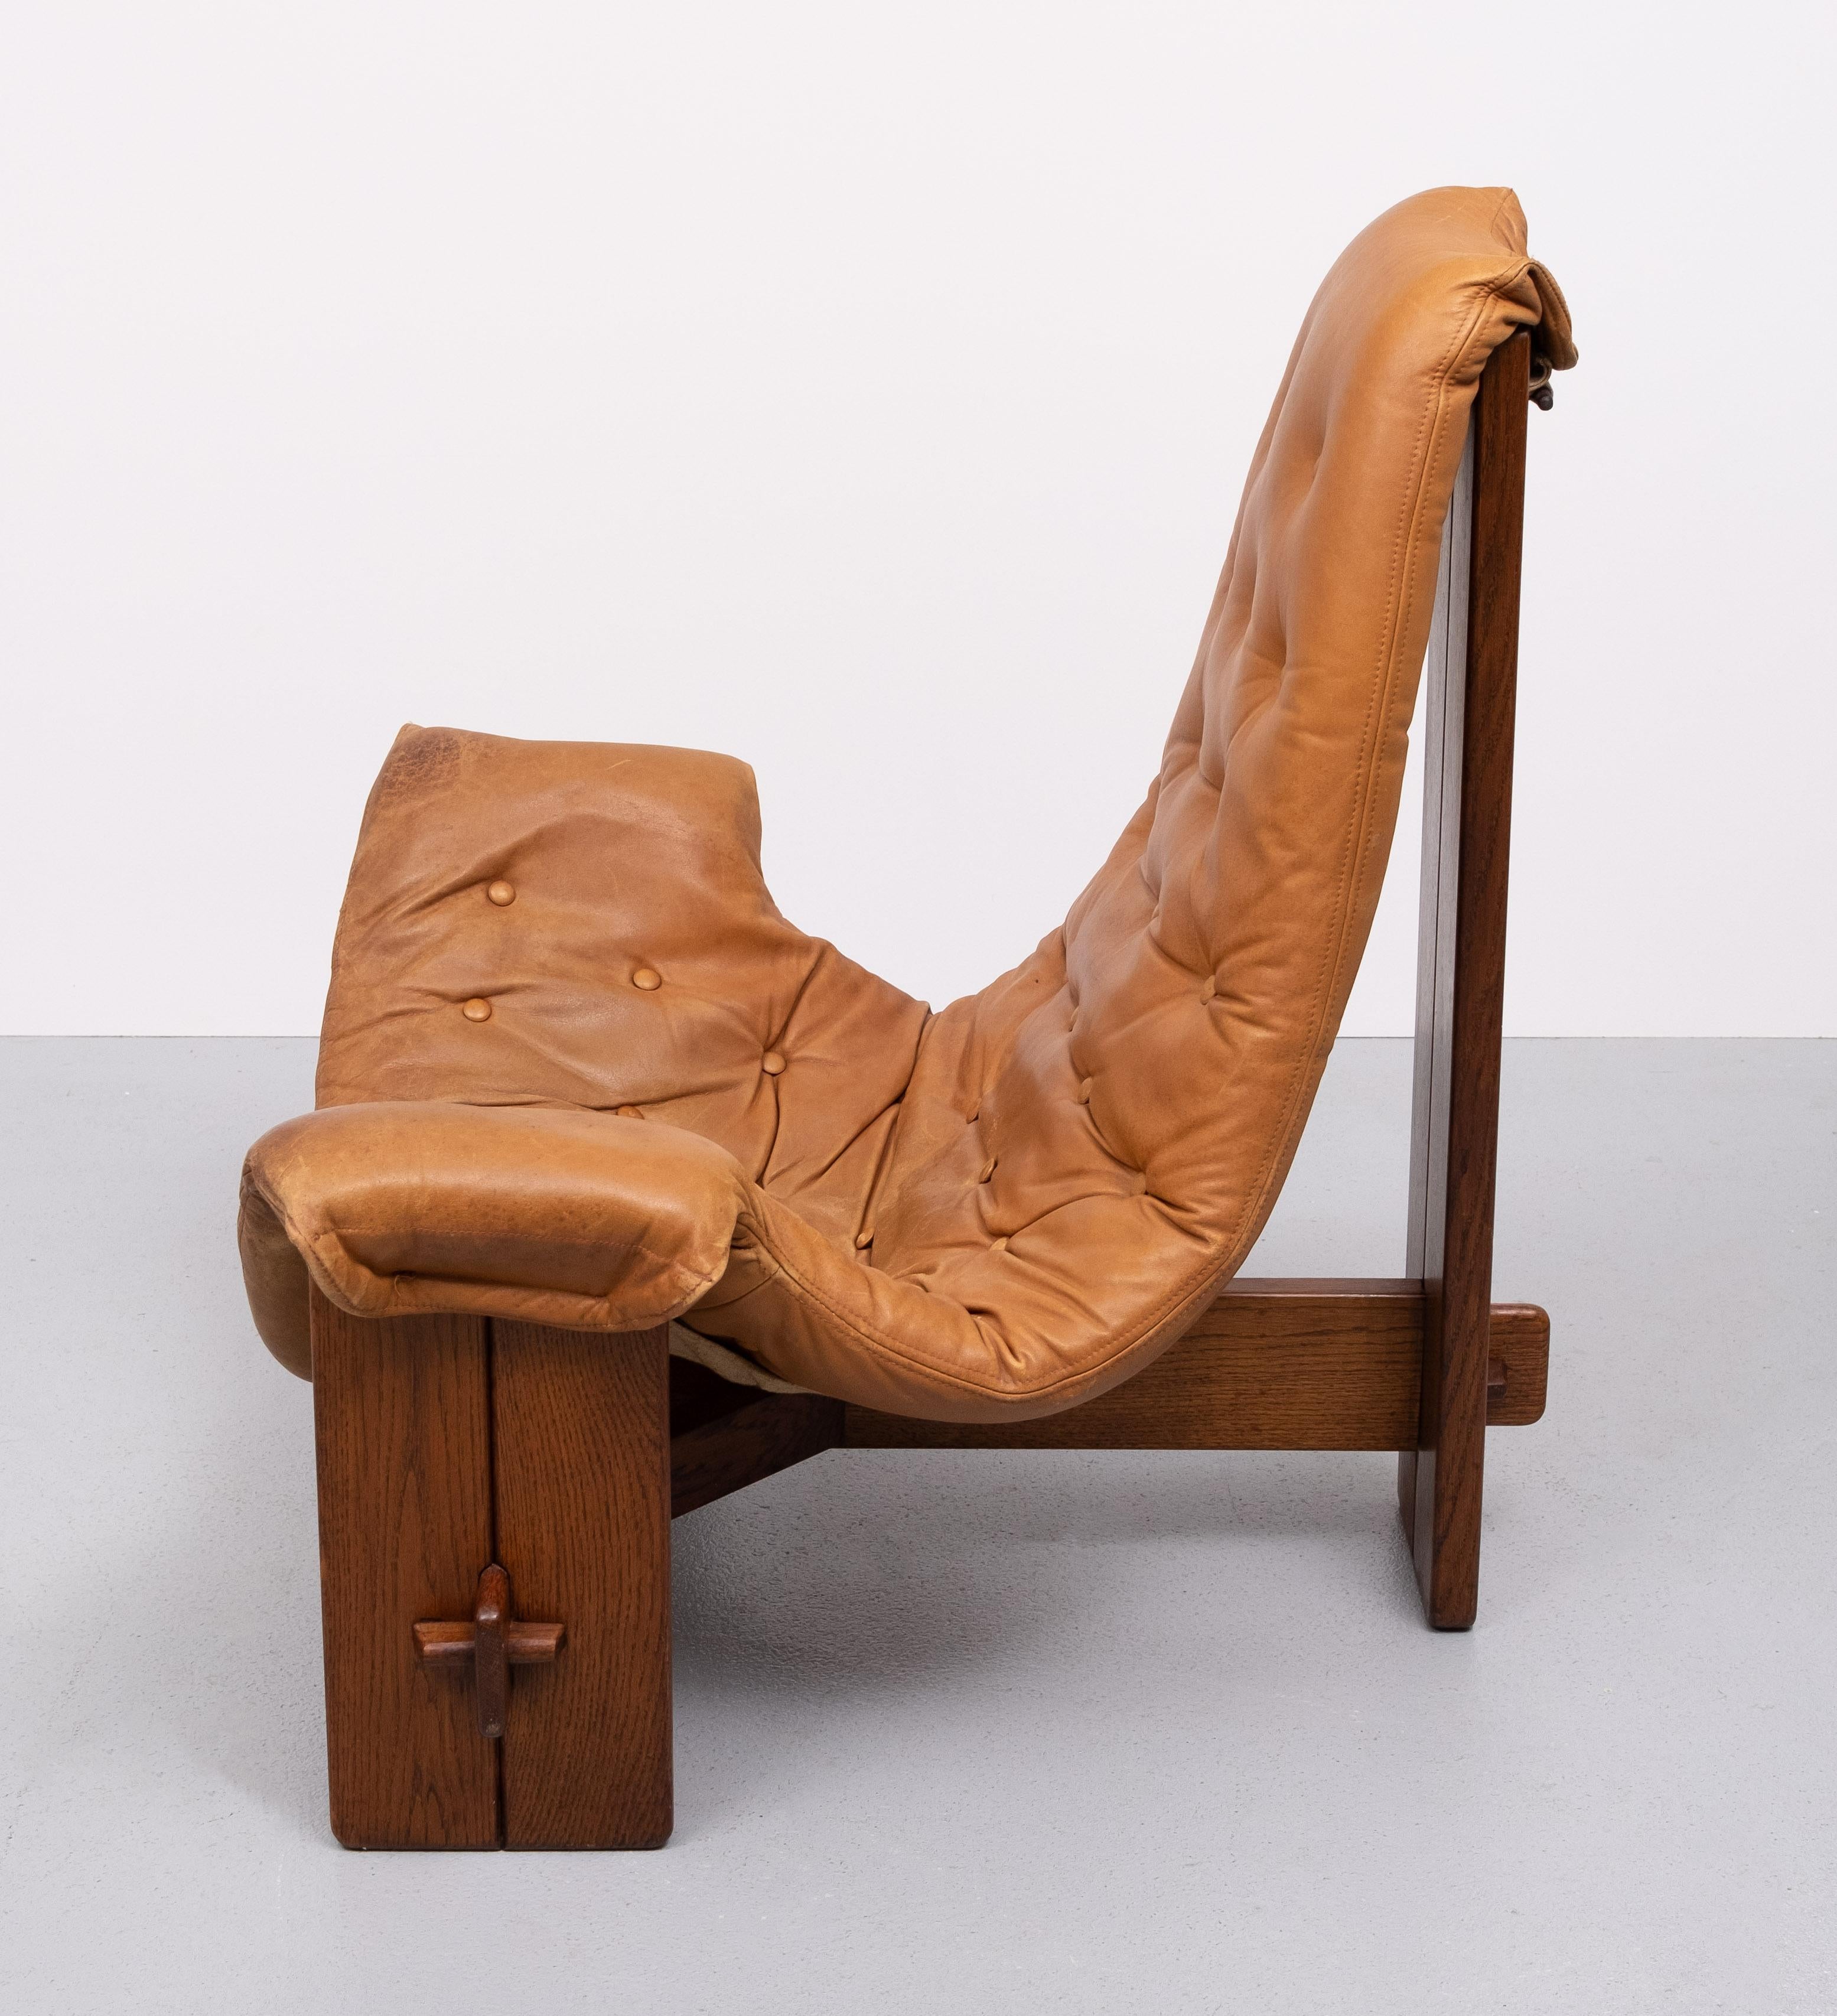  Brutalist Sling Lounge Chair in Full Original Condition 1960s Brazil  For Sale 6